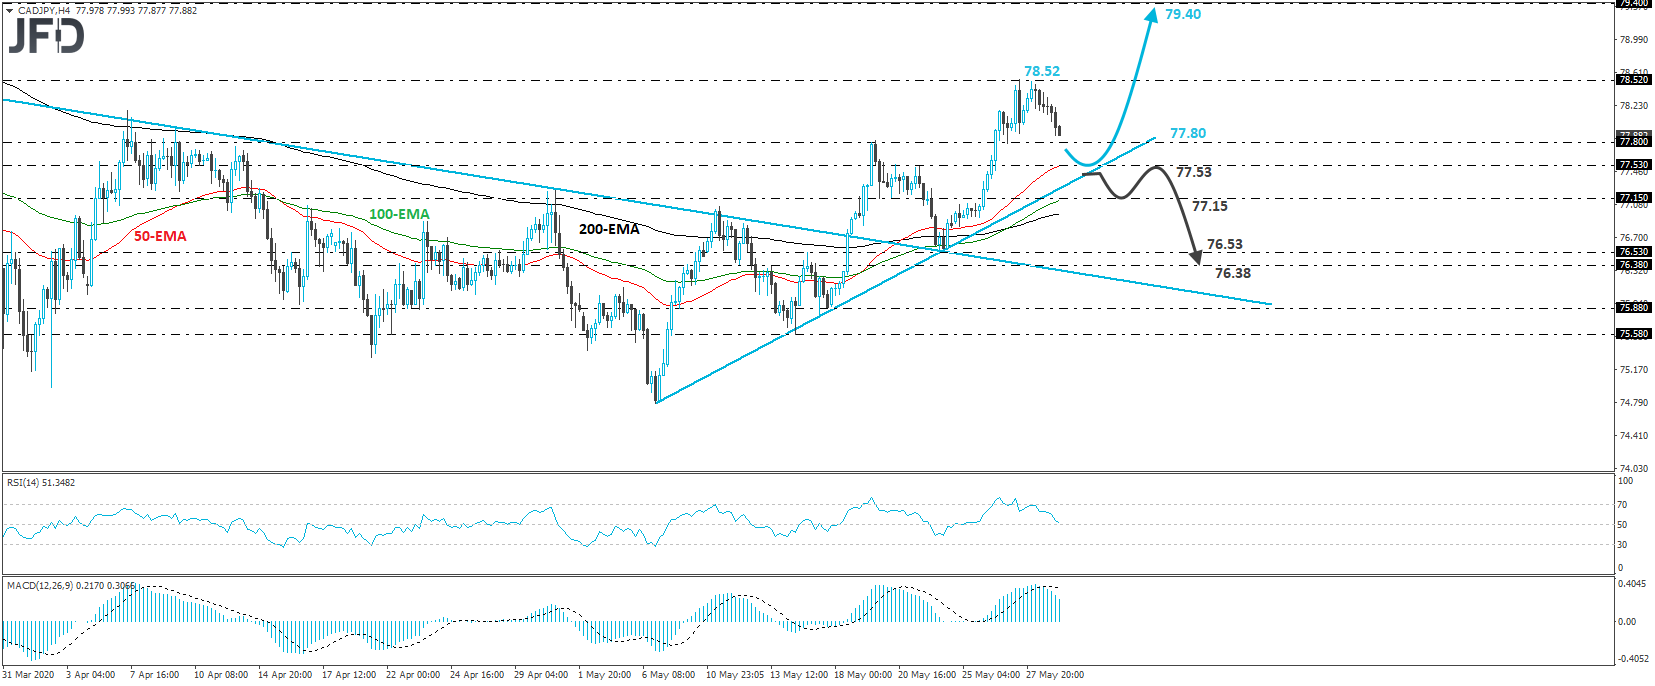 CAD/JPY 4-hour chart technical analysis